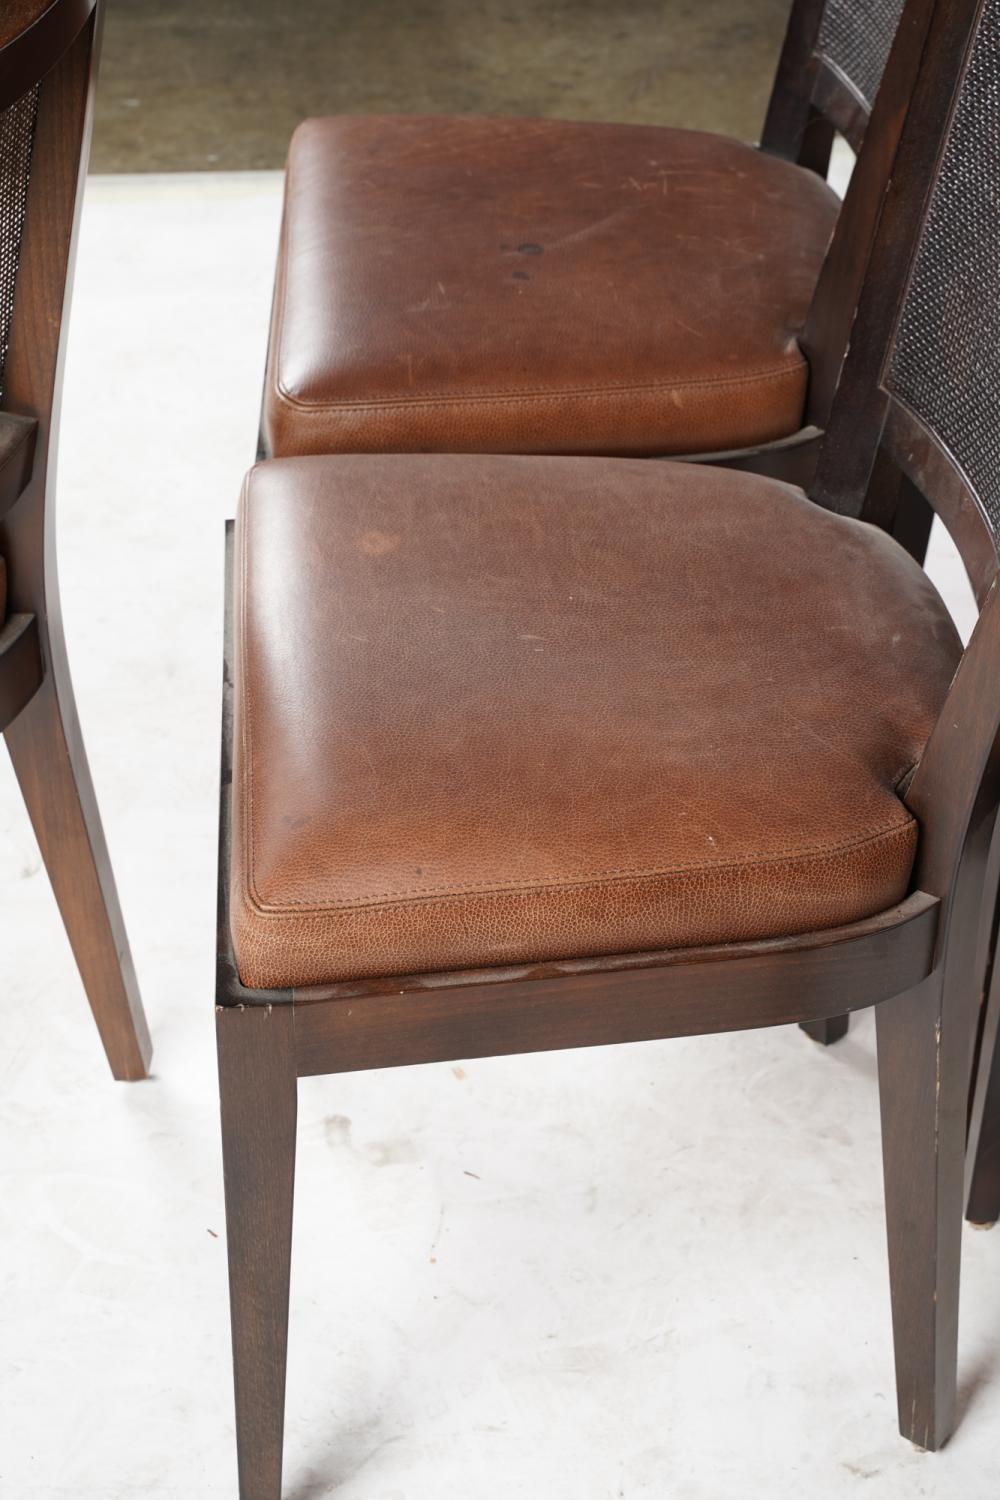 Set Six Promemoria Caffe Caned Leather Dining Chairs Contemporary Italian C 2000 In Good Condition For Sale In Los Angeles, CA